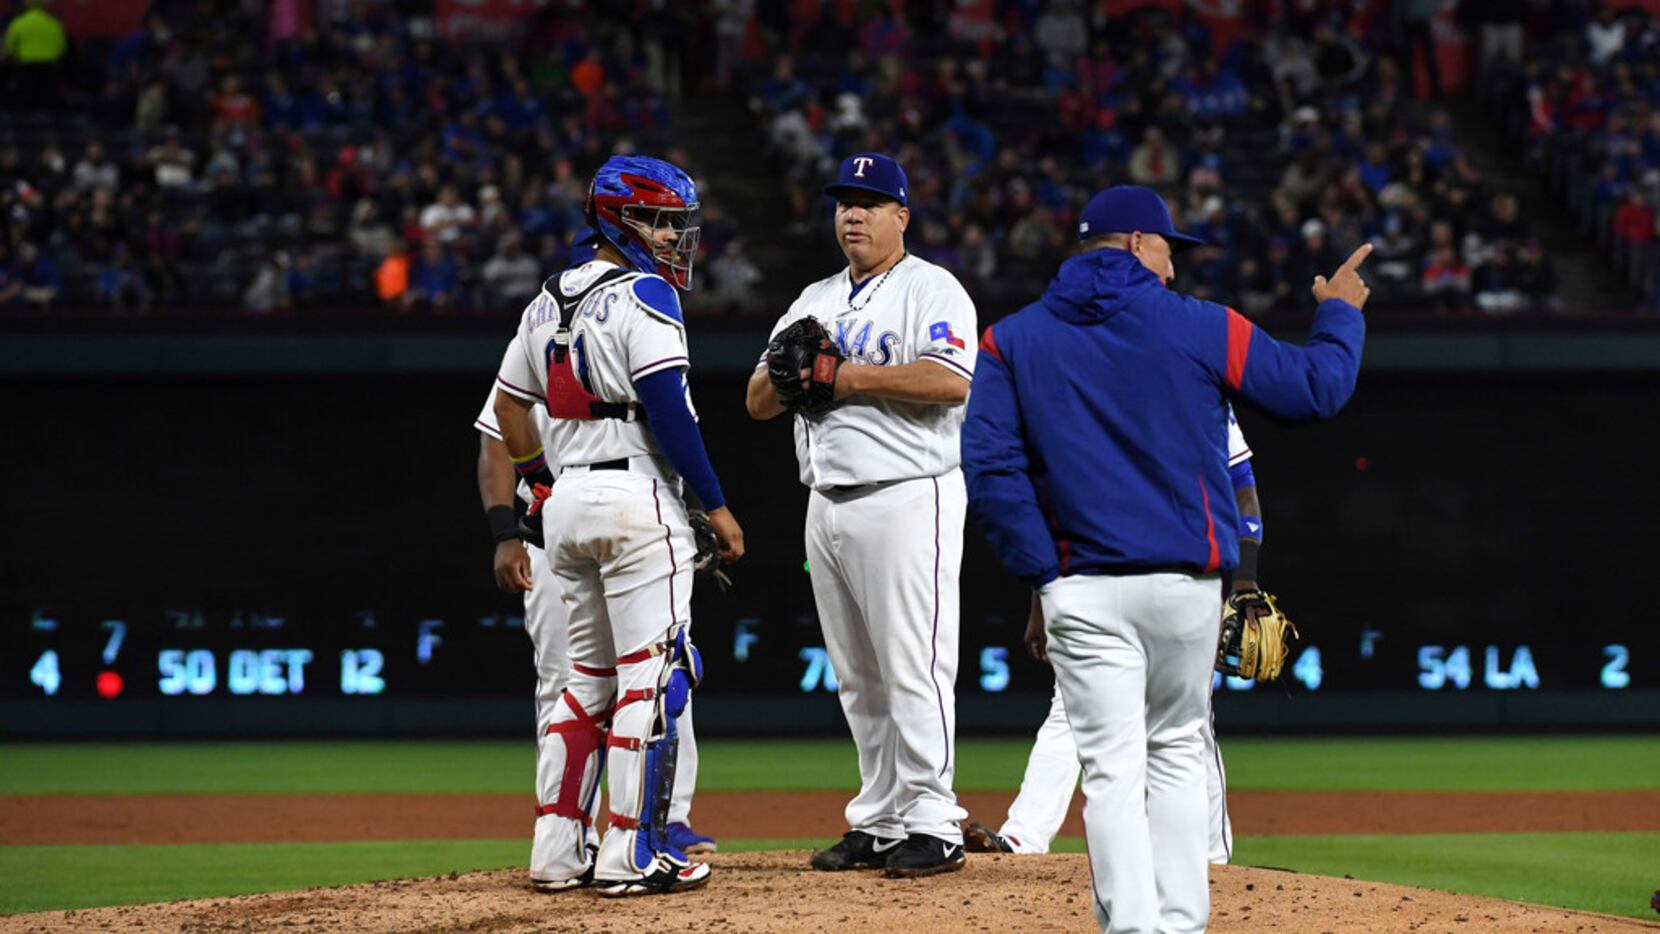 Texas Rangers starting pitcher Bartolo Colon, center, stands on the mound with catcher...